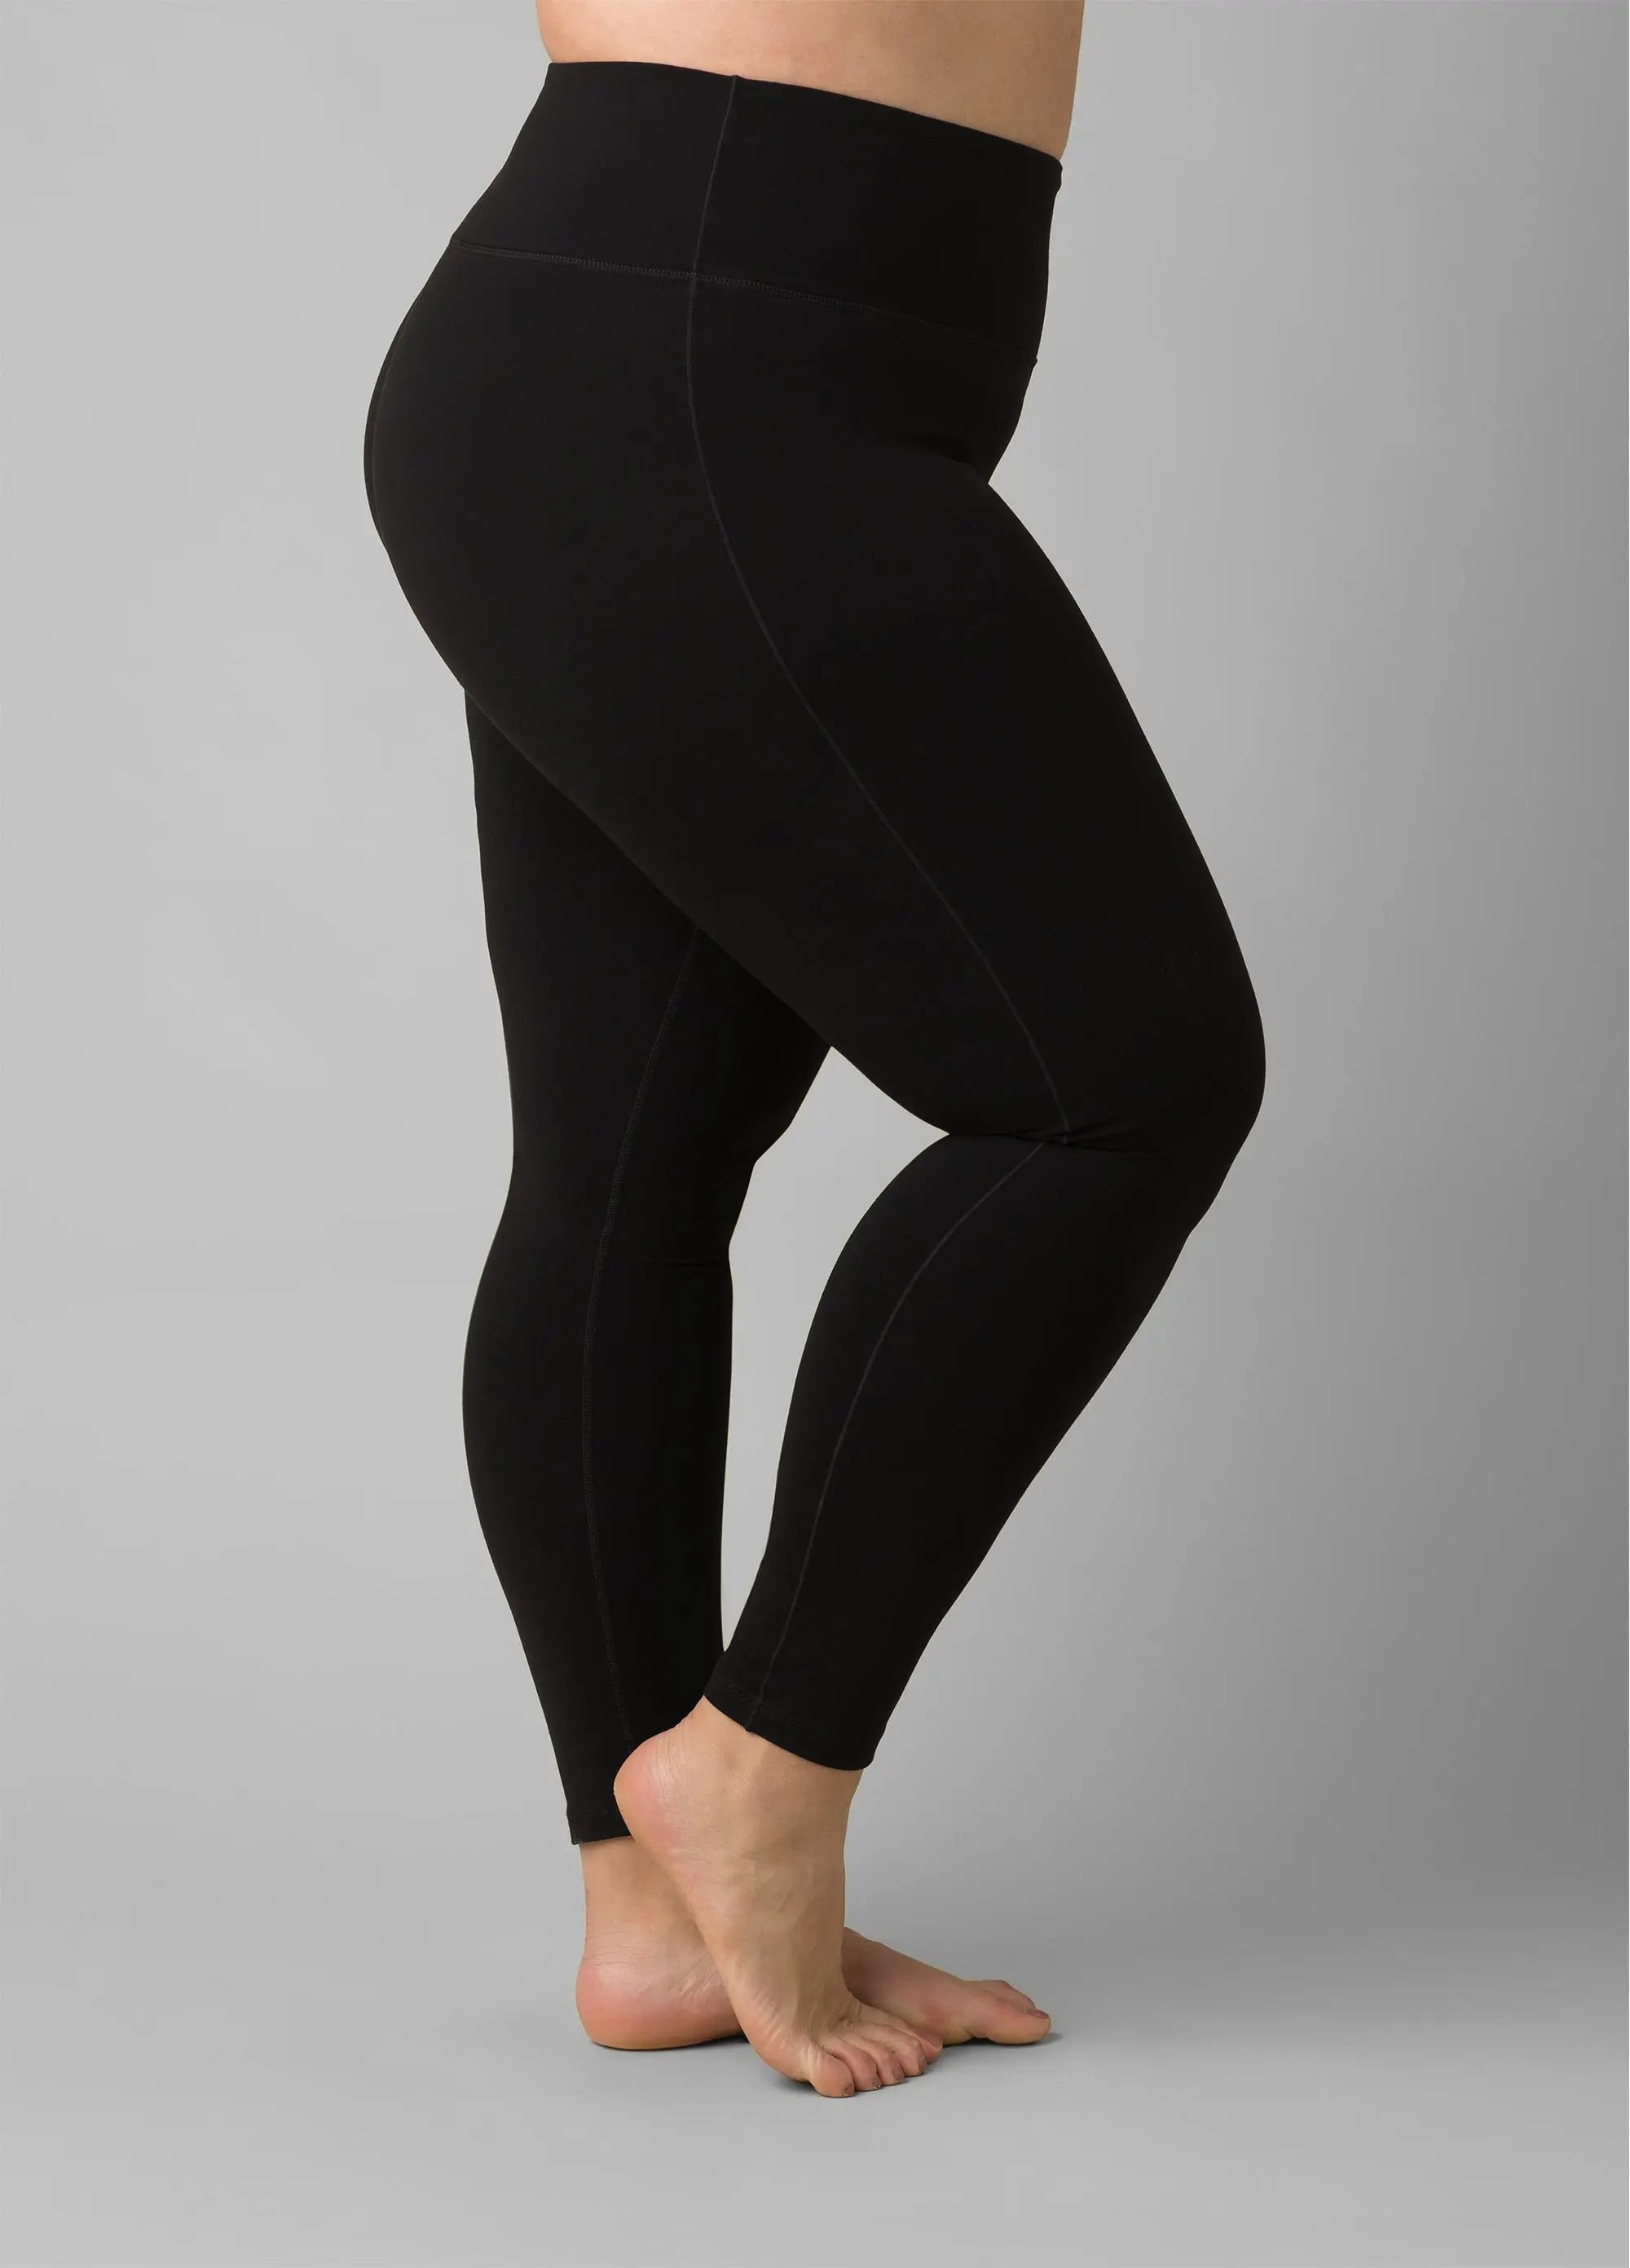 I love the prAna Pillar Legging! Check it out and more at www.prAna.com